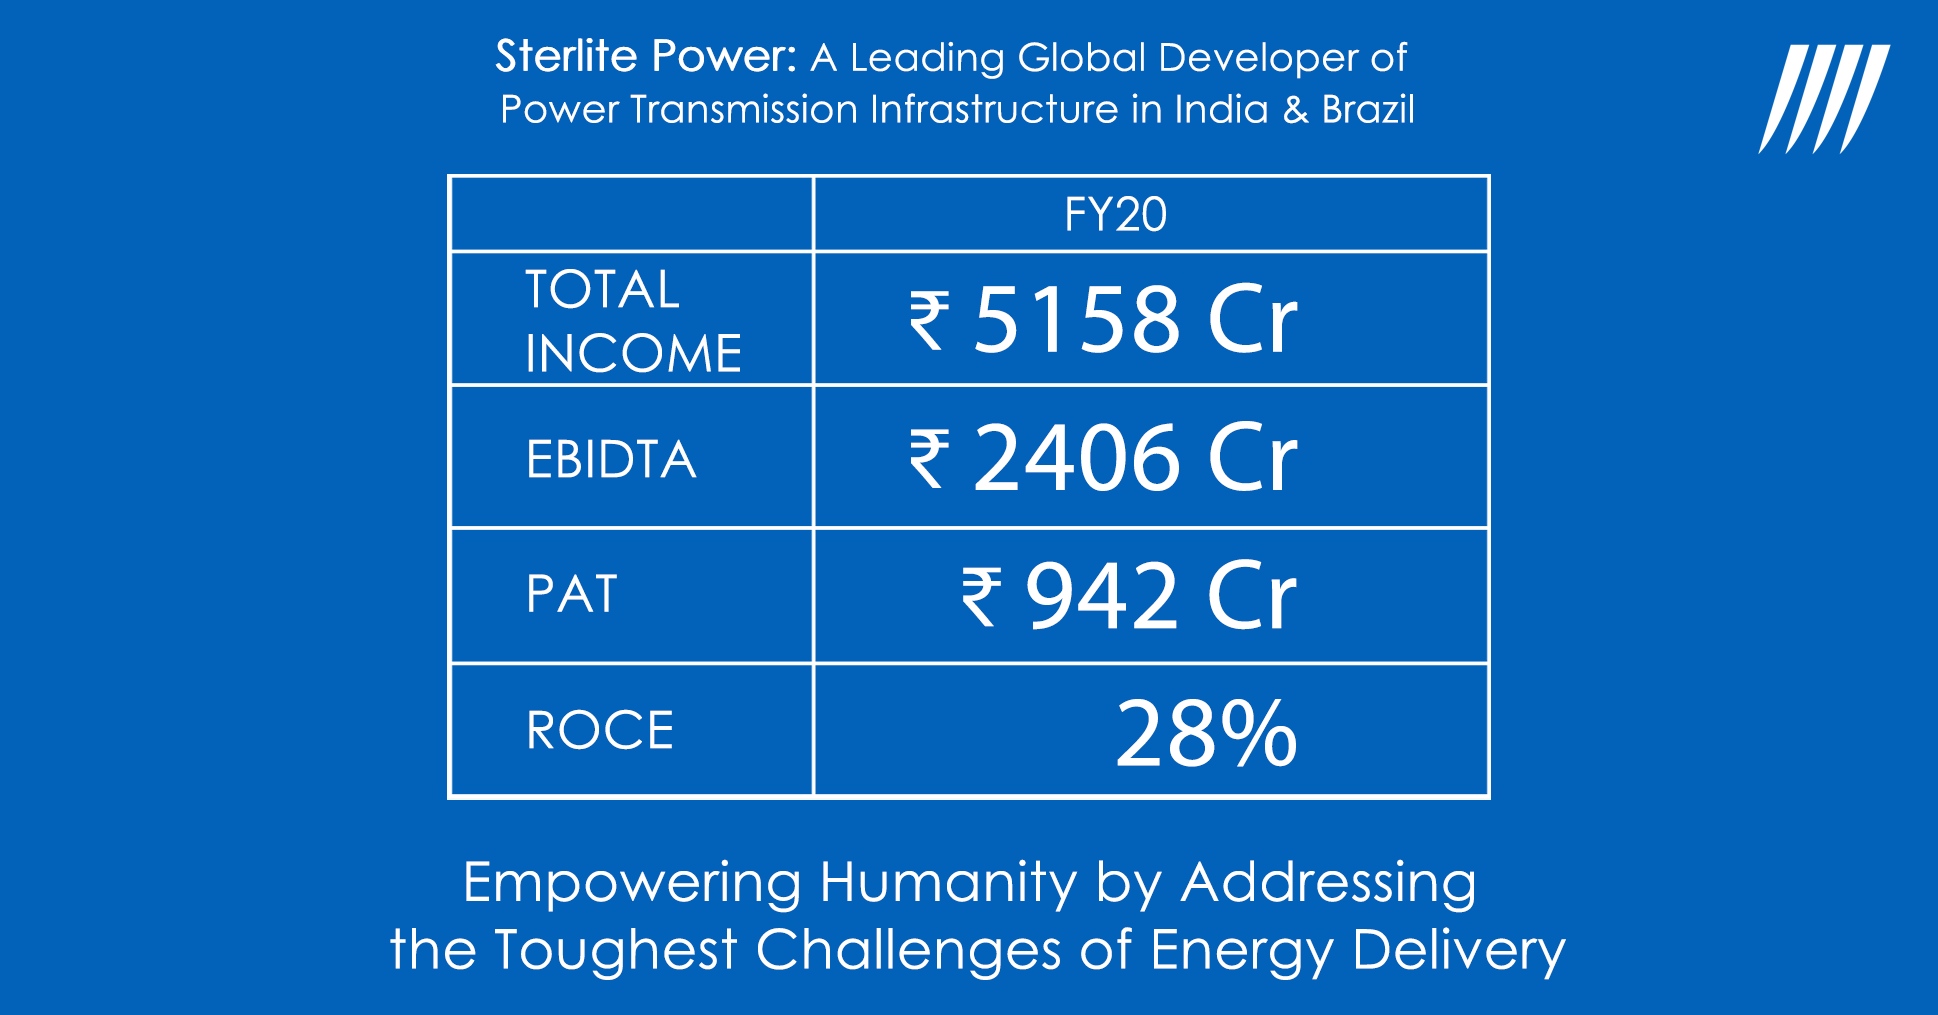 sterlite-power-announces-consolidated-pat-of-inr-942-cr-for-fy-2020